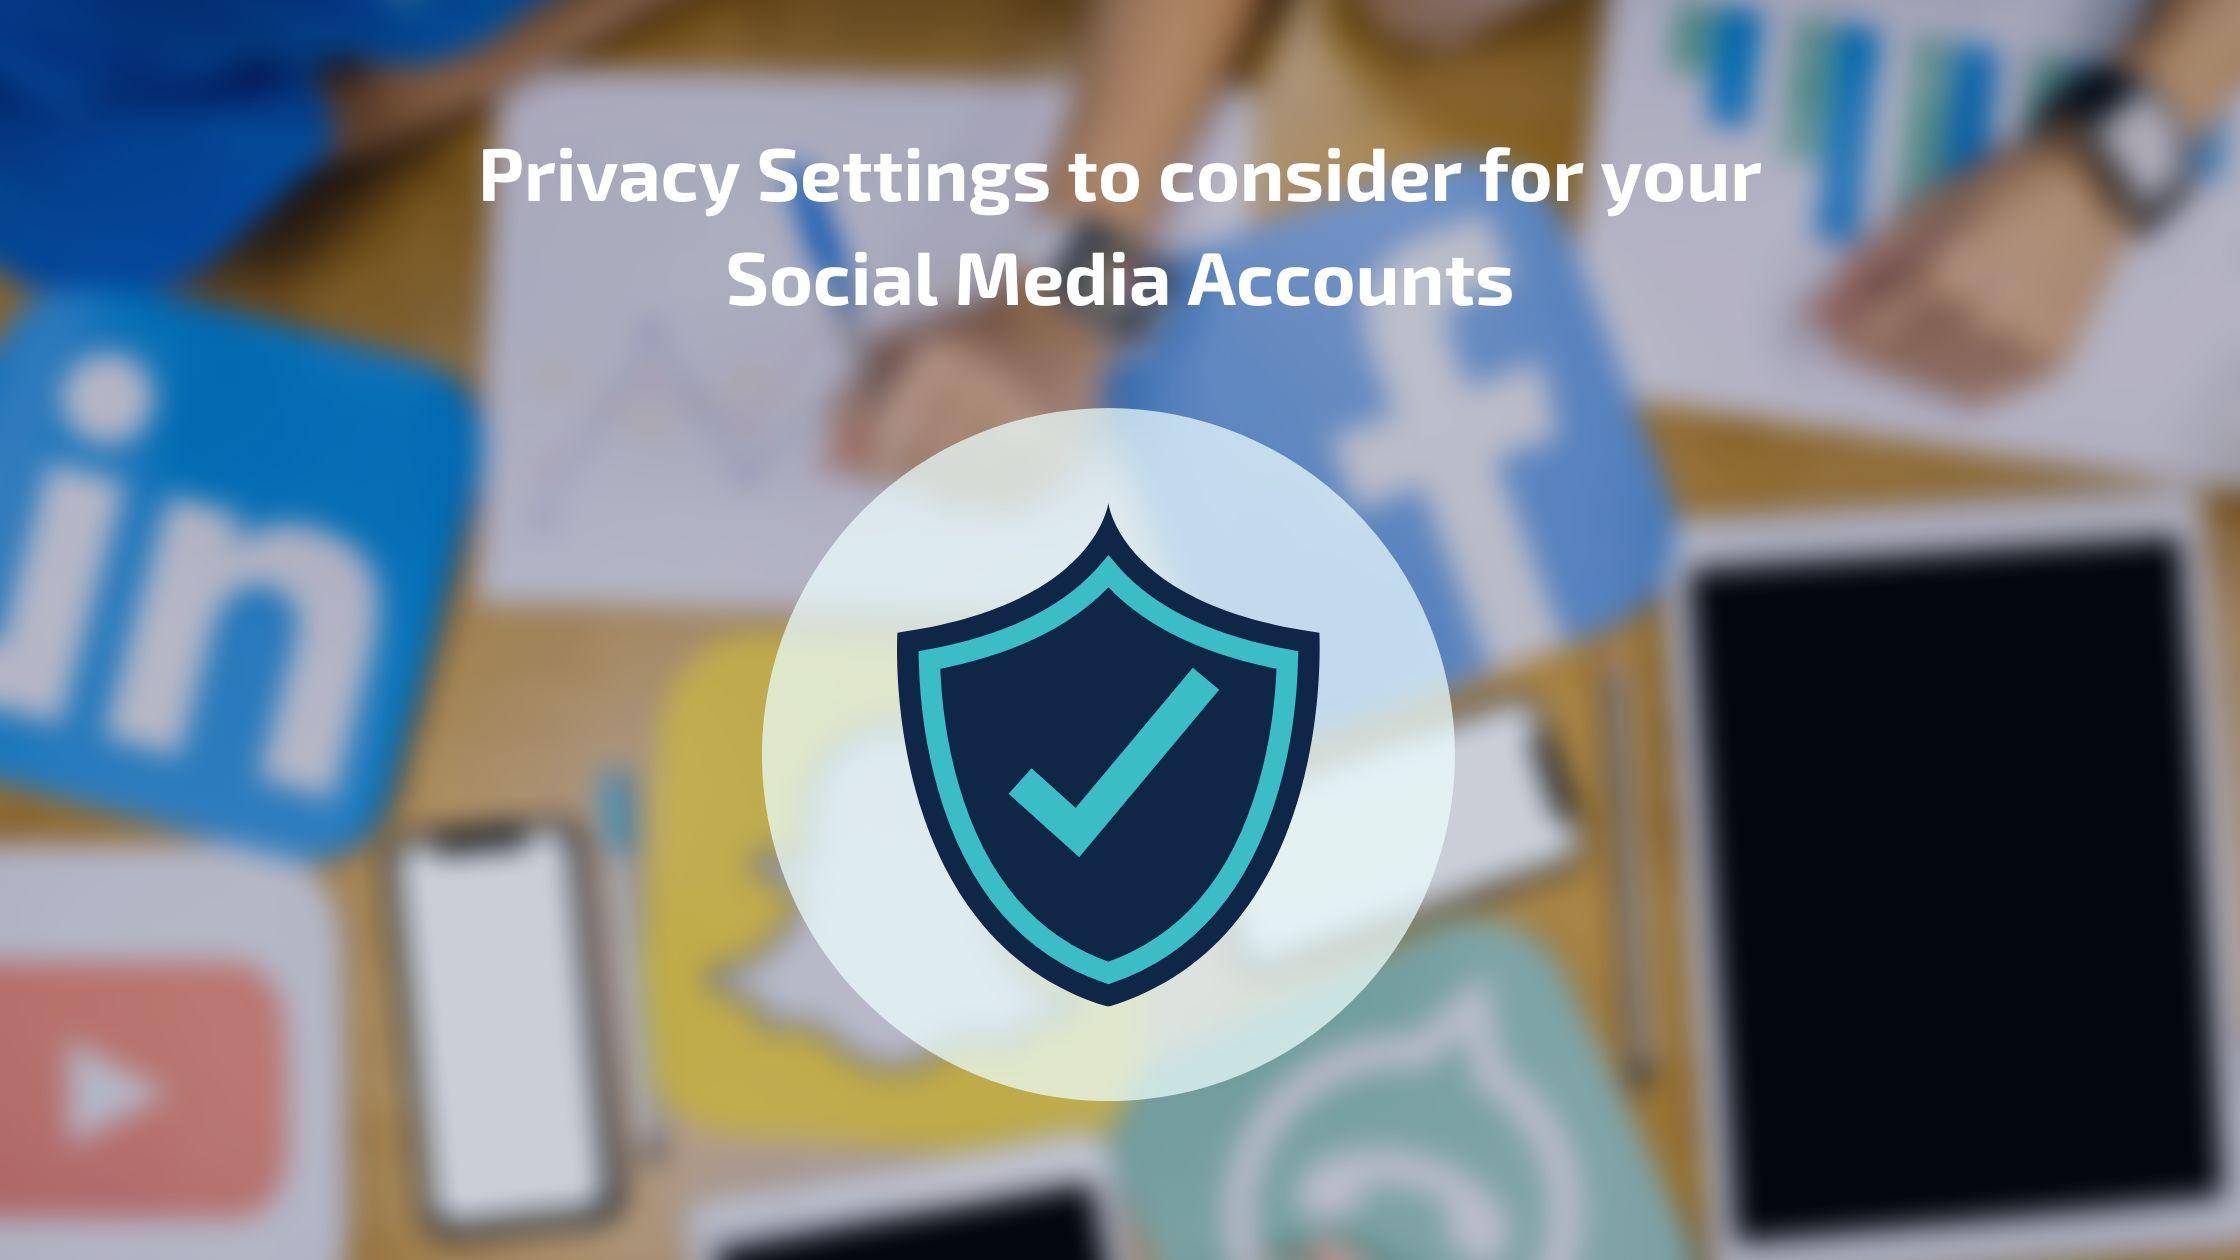 How to configure Privacy settings on Social Media Accounts